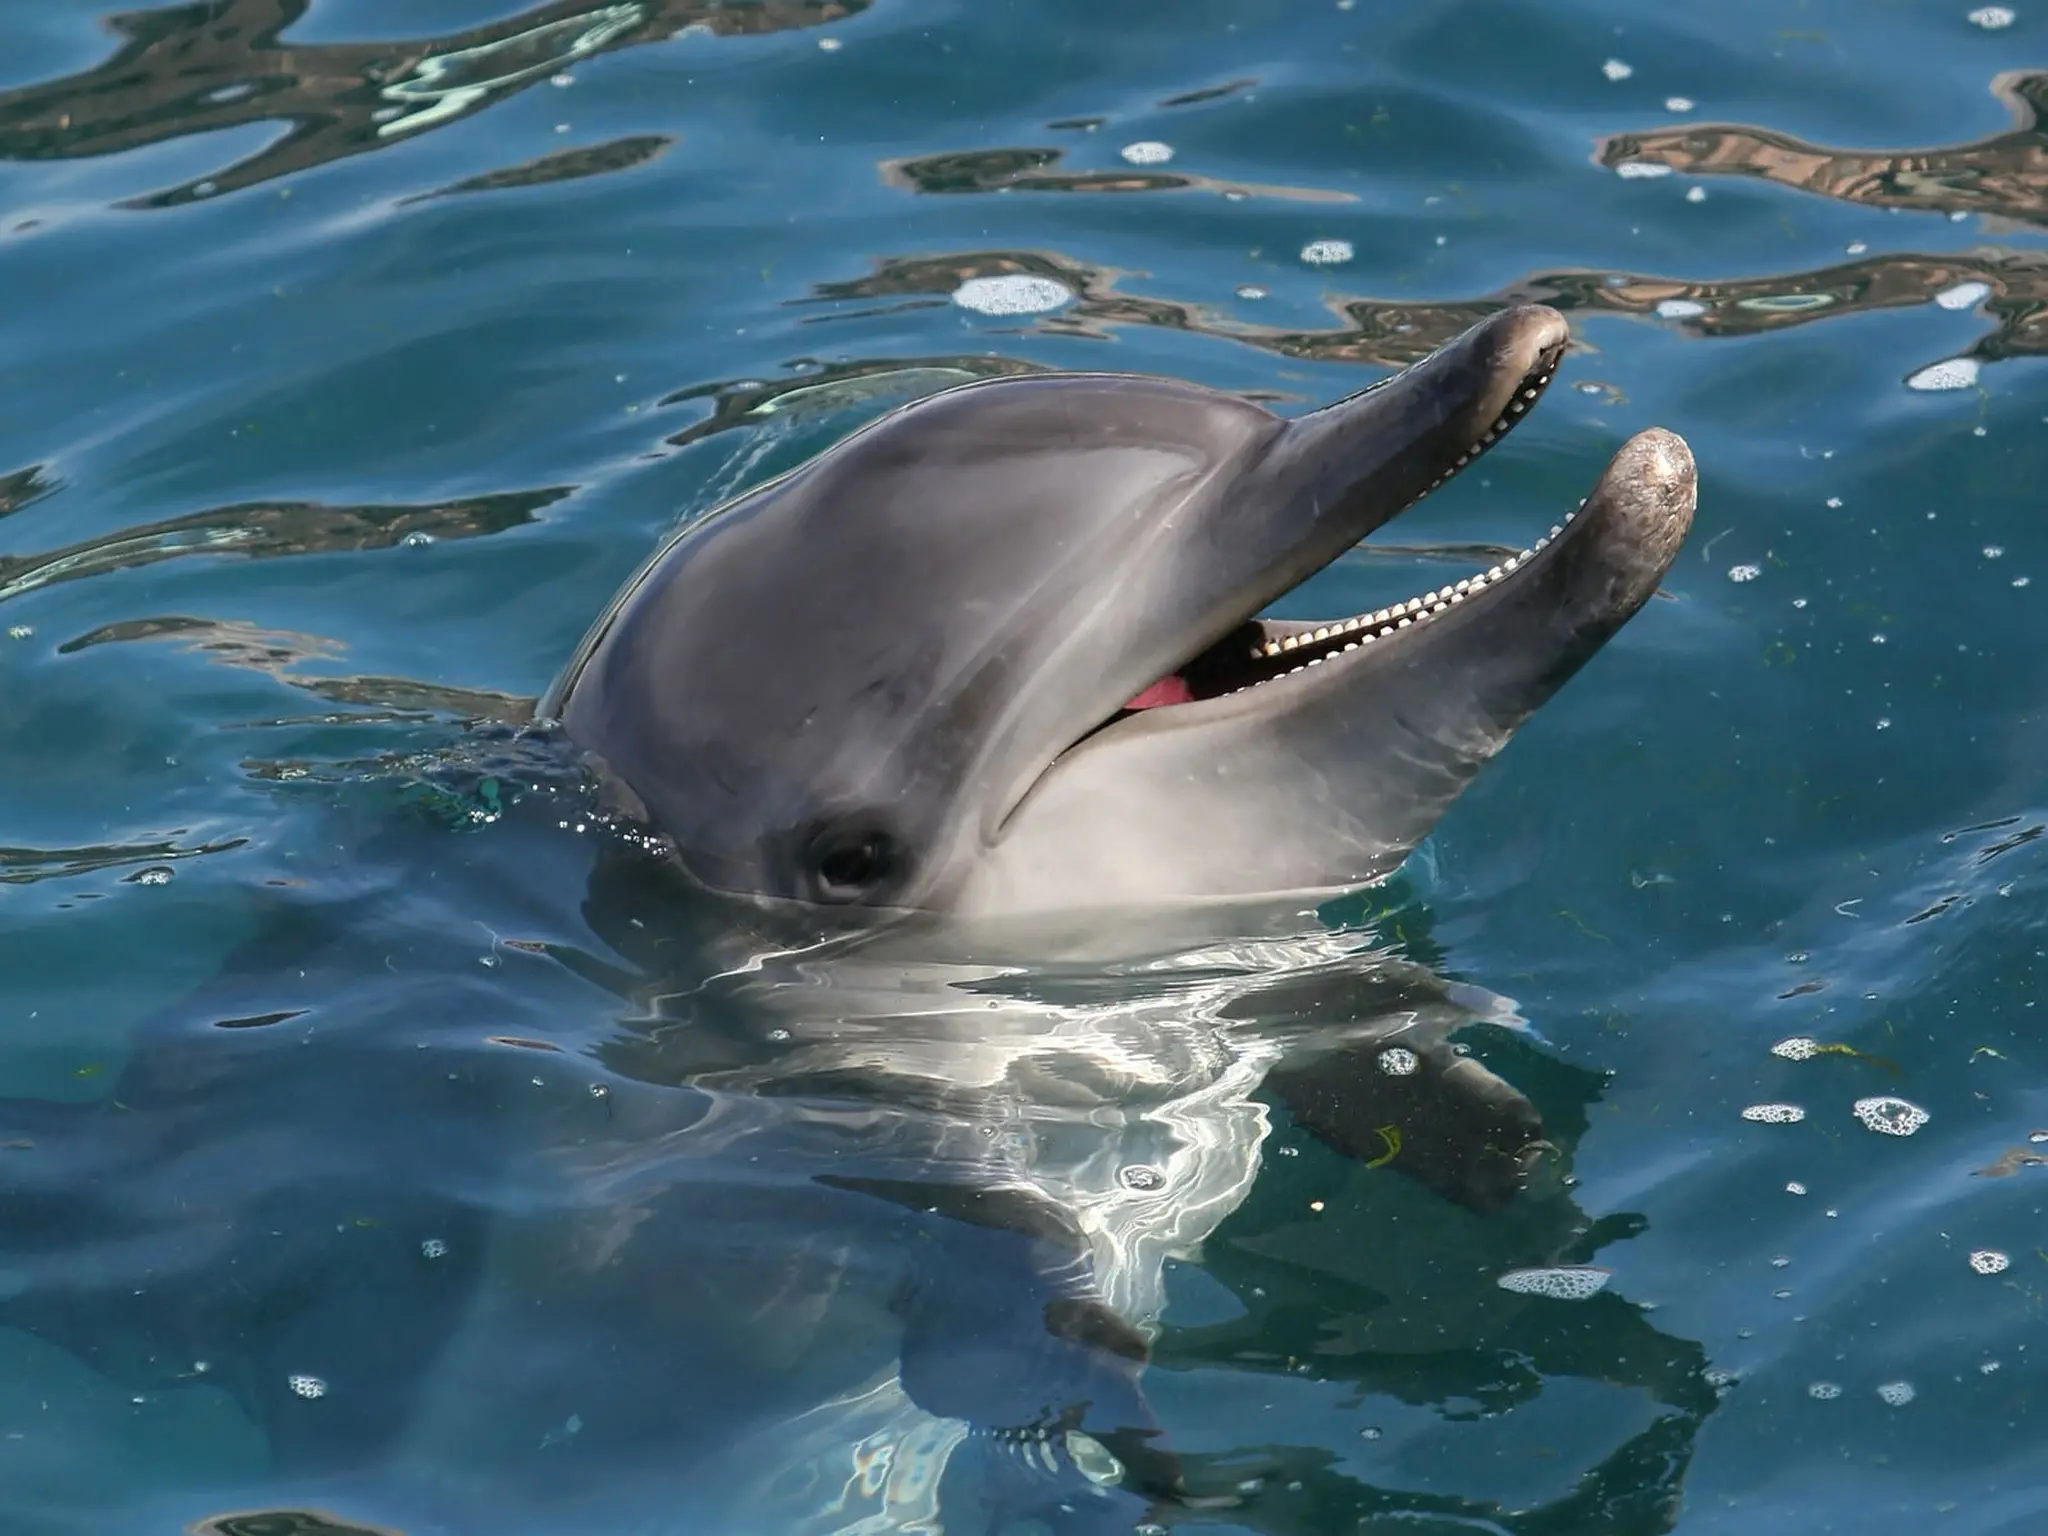 Urgent.. A dolphin attacks a man off the coast of Japan and breaking his bones.